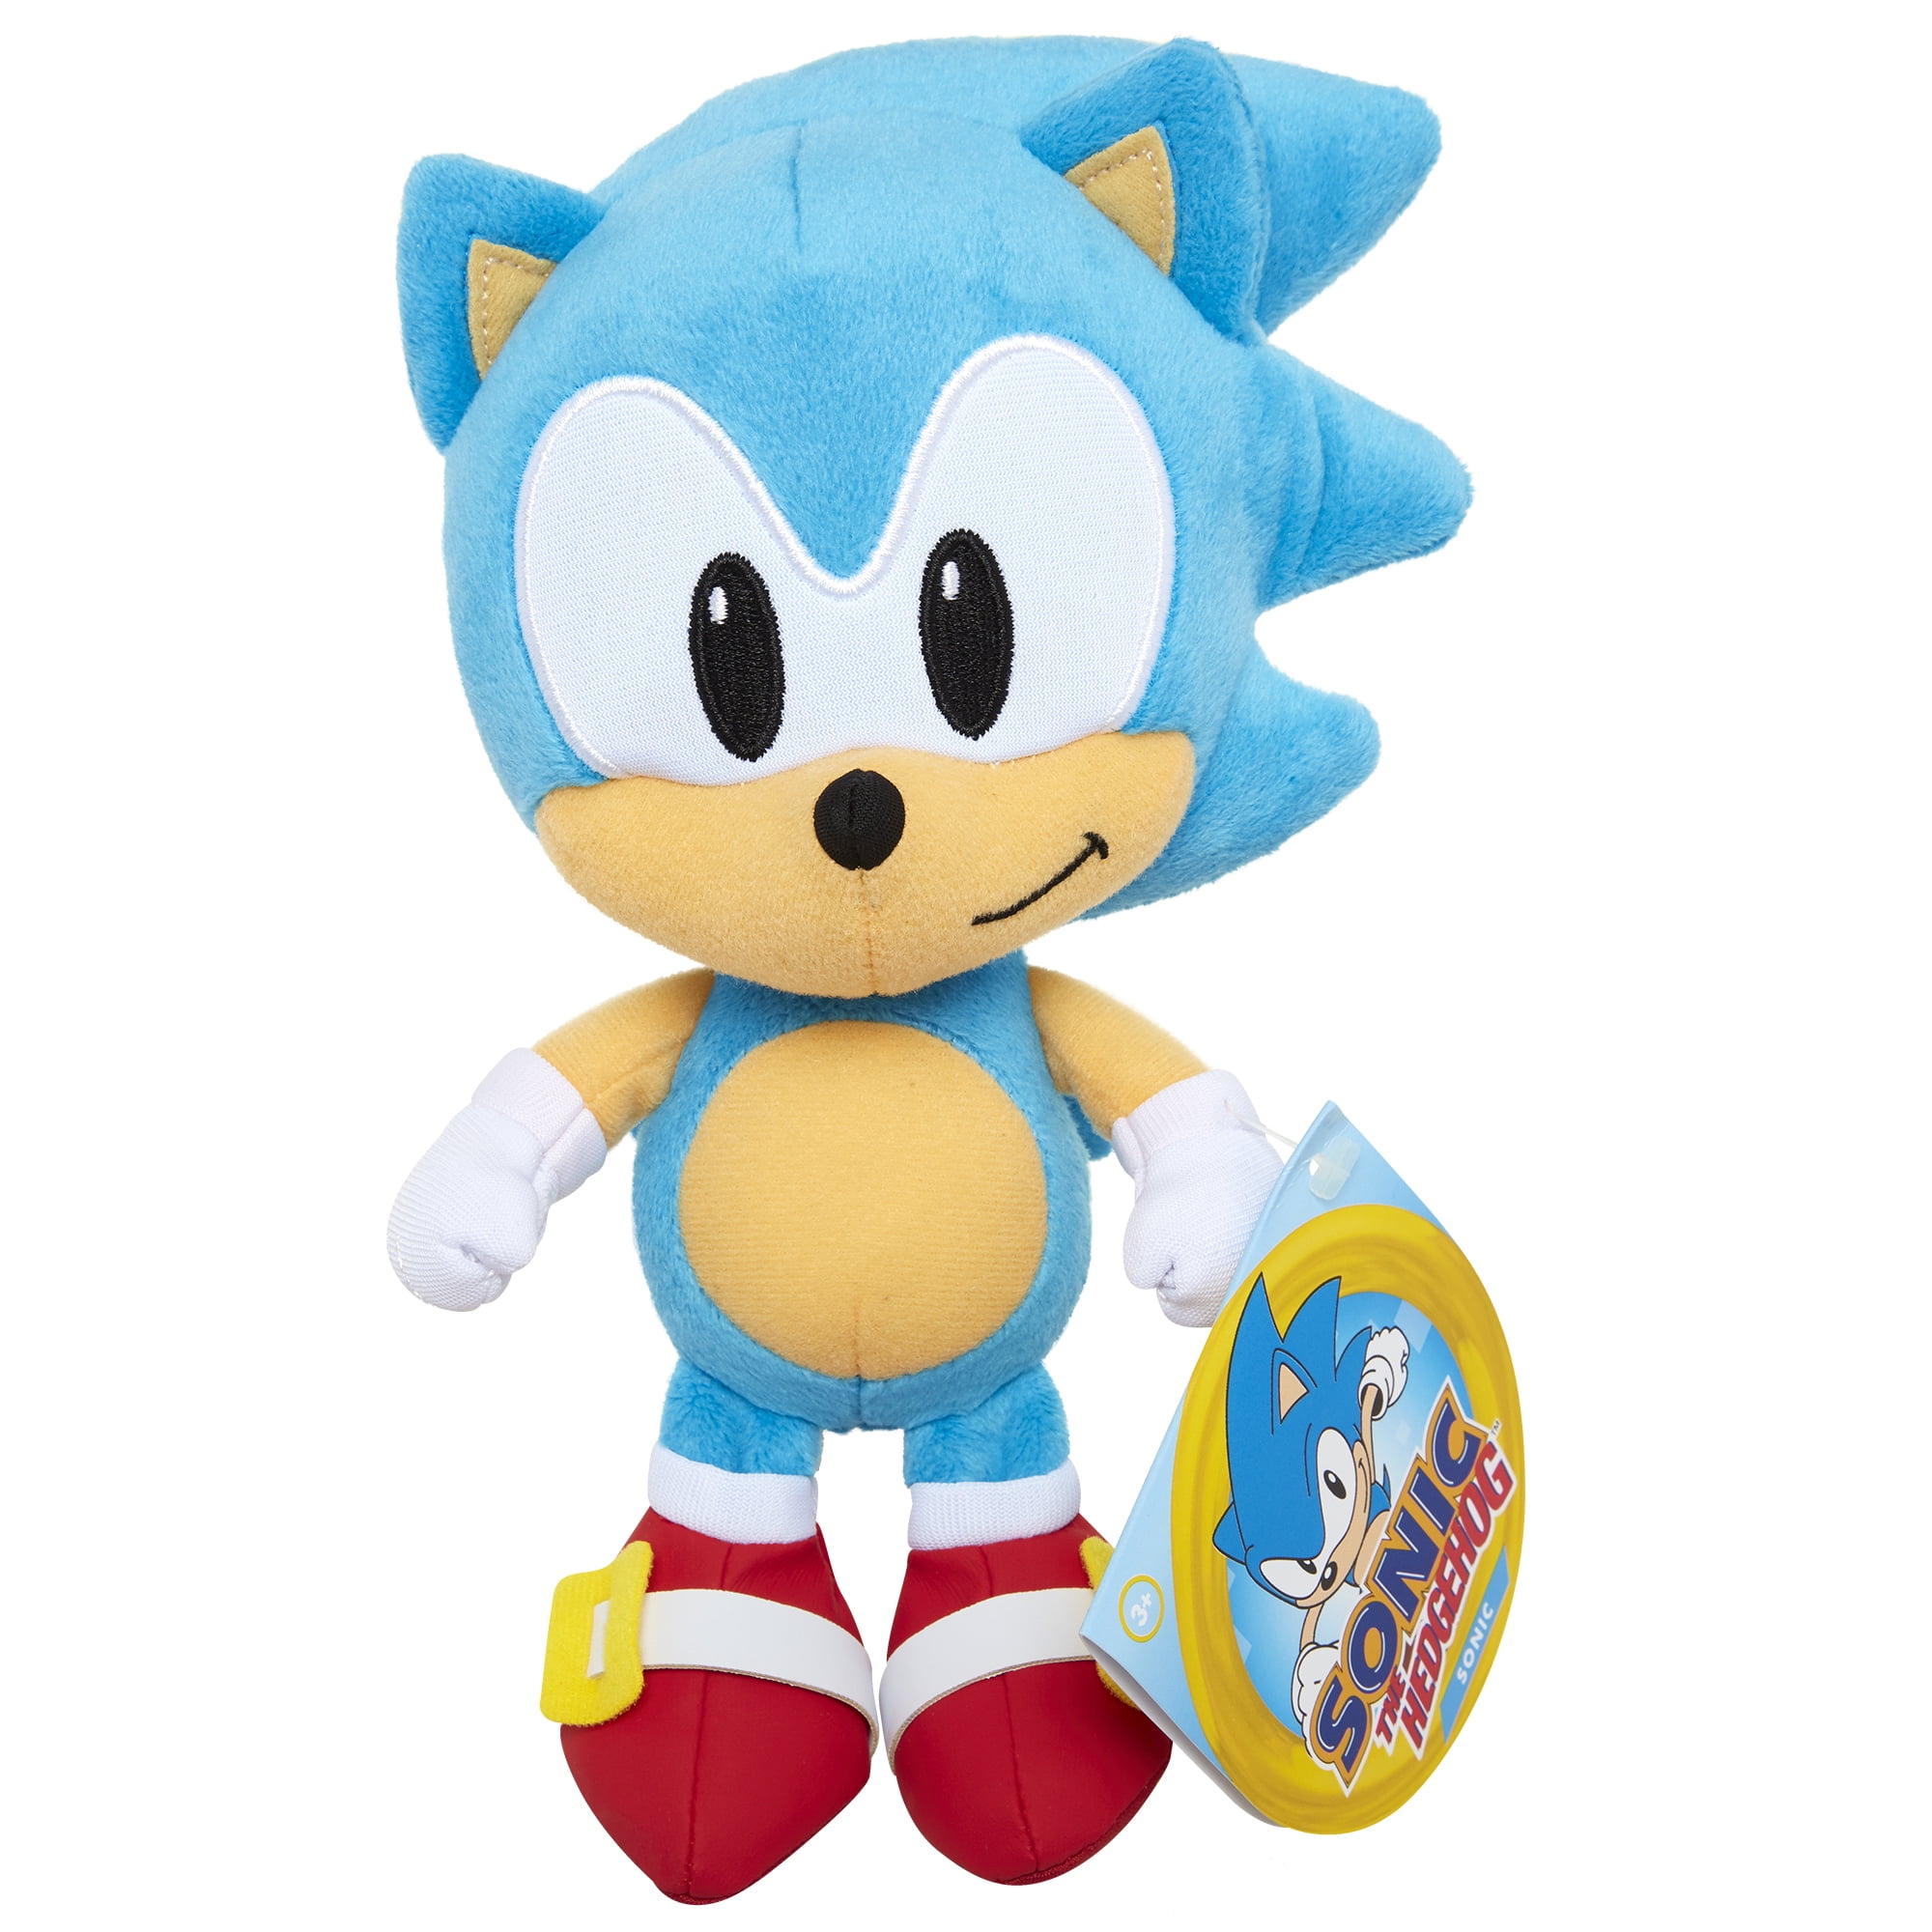 Super Sonic The Hedgehog Tails Plush Doll Stuffed Animal Toys 13 in Gifts Child